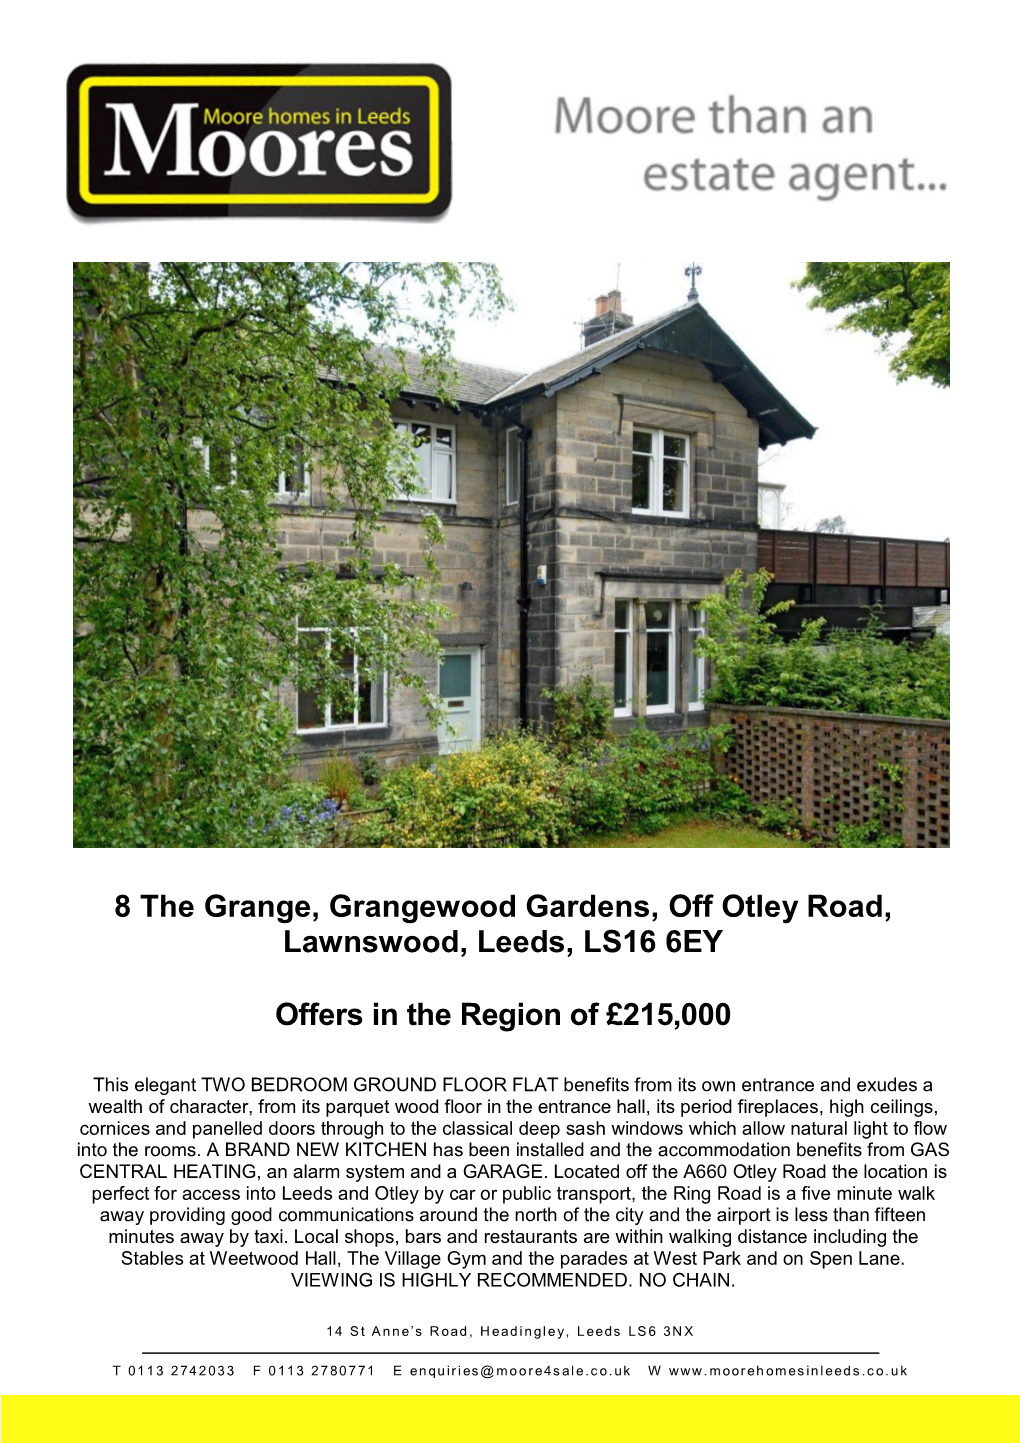 8 the Grange, Grangewood Gardens, Off Otley Road, Lawnswood, Leeds, LS16 6EY Offers in the Region of £215,000